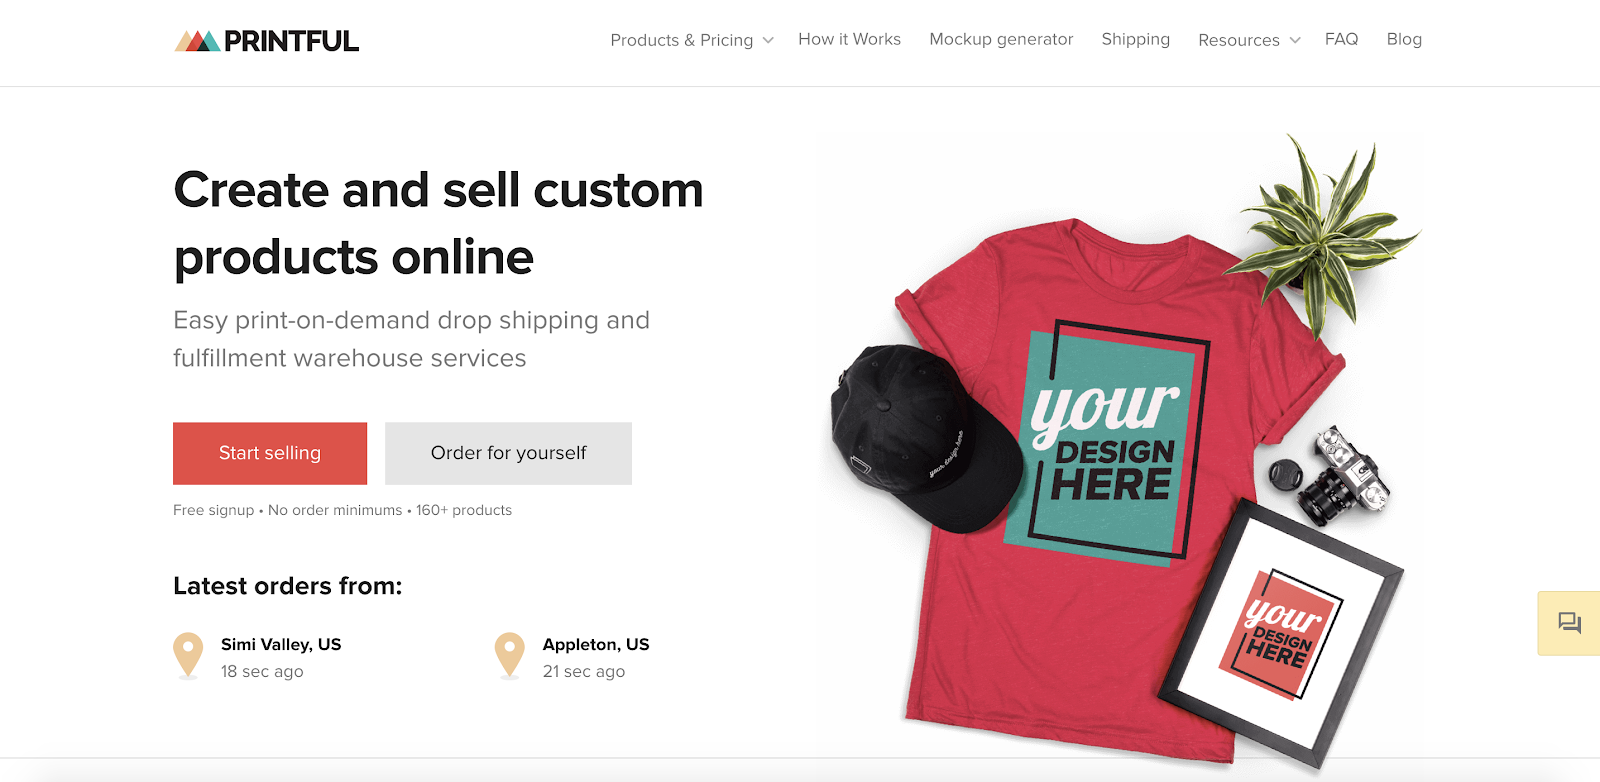 15 Best Shopify Apps to Grow Your Ecommerce Store In 2020